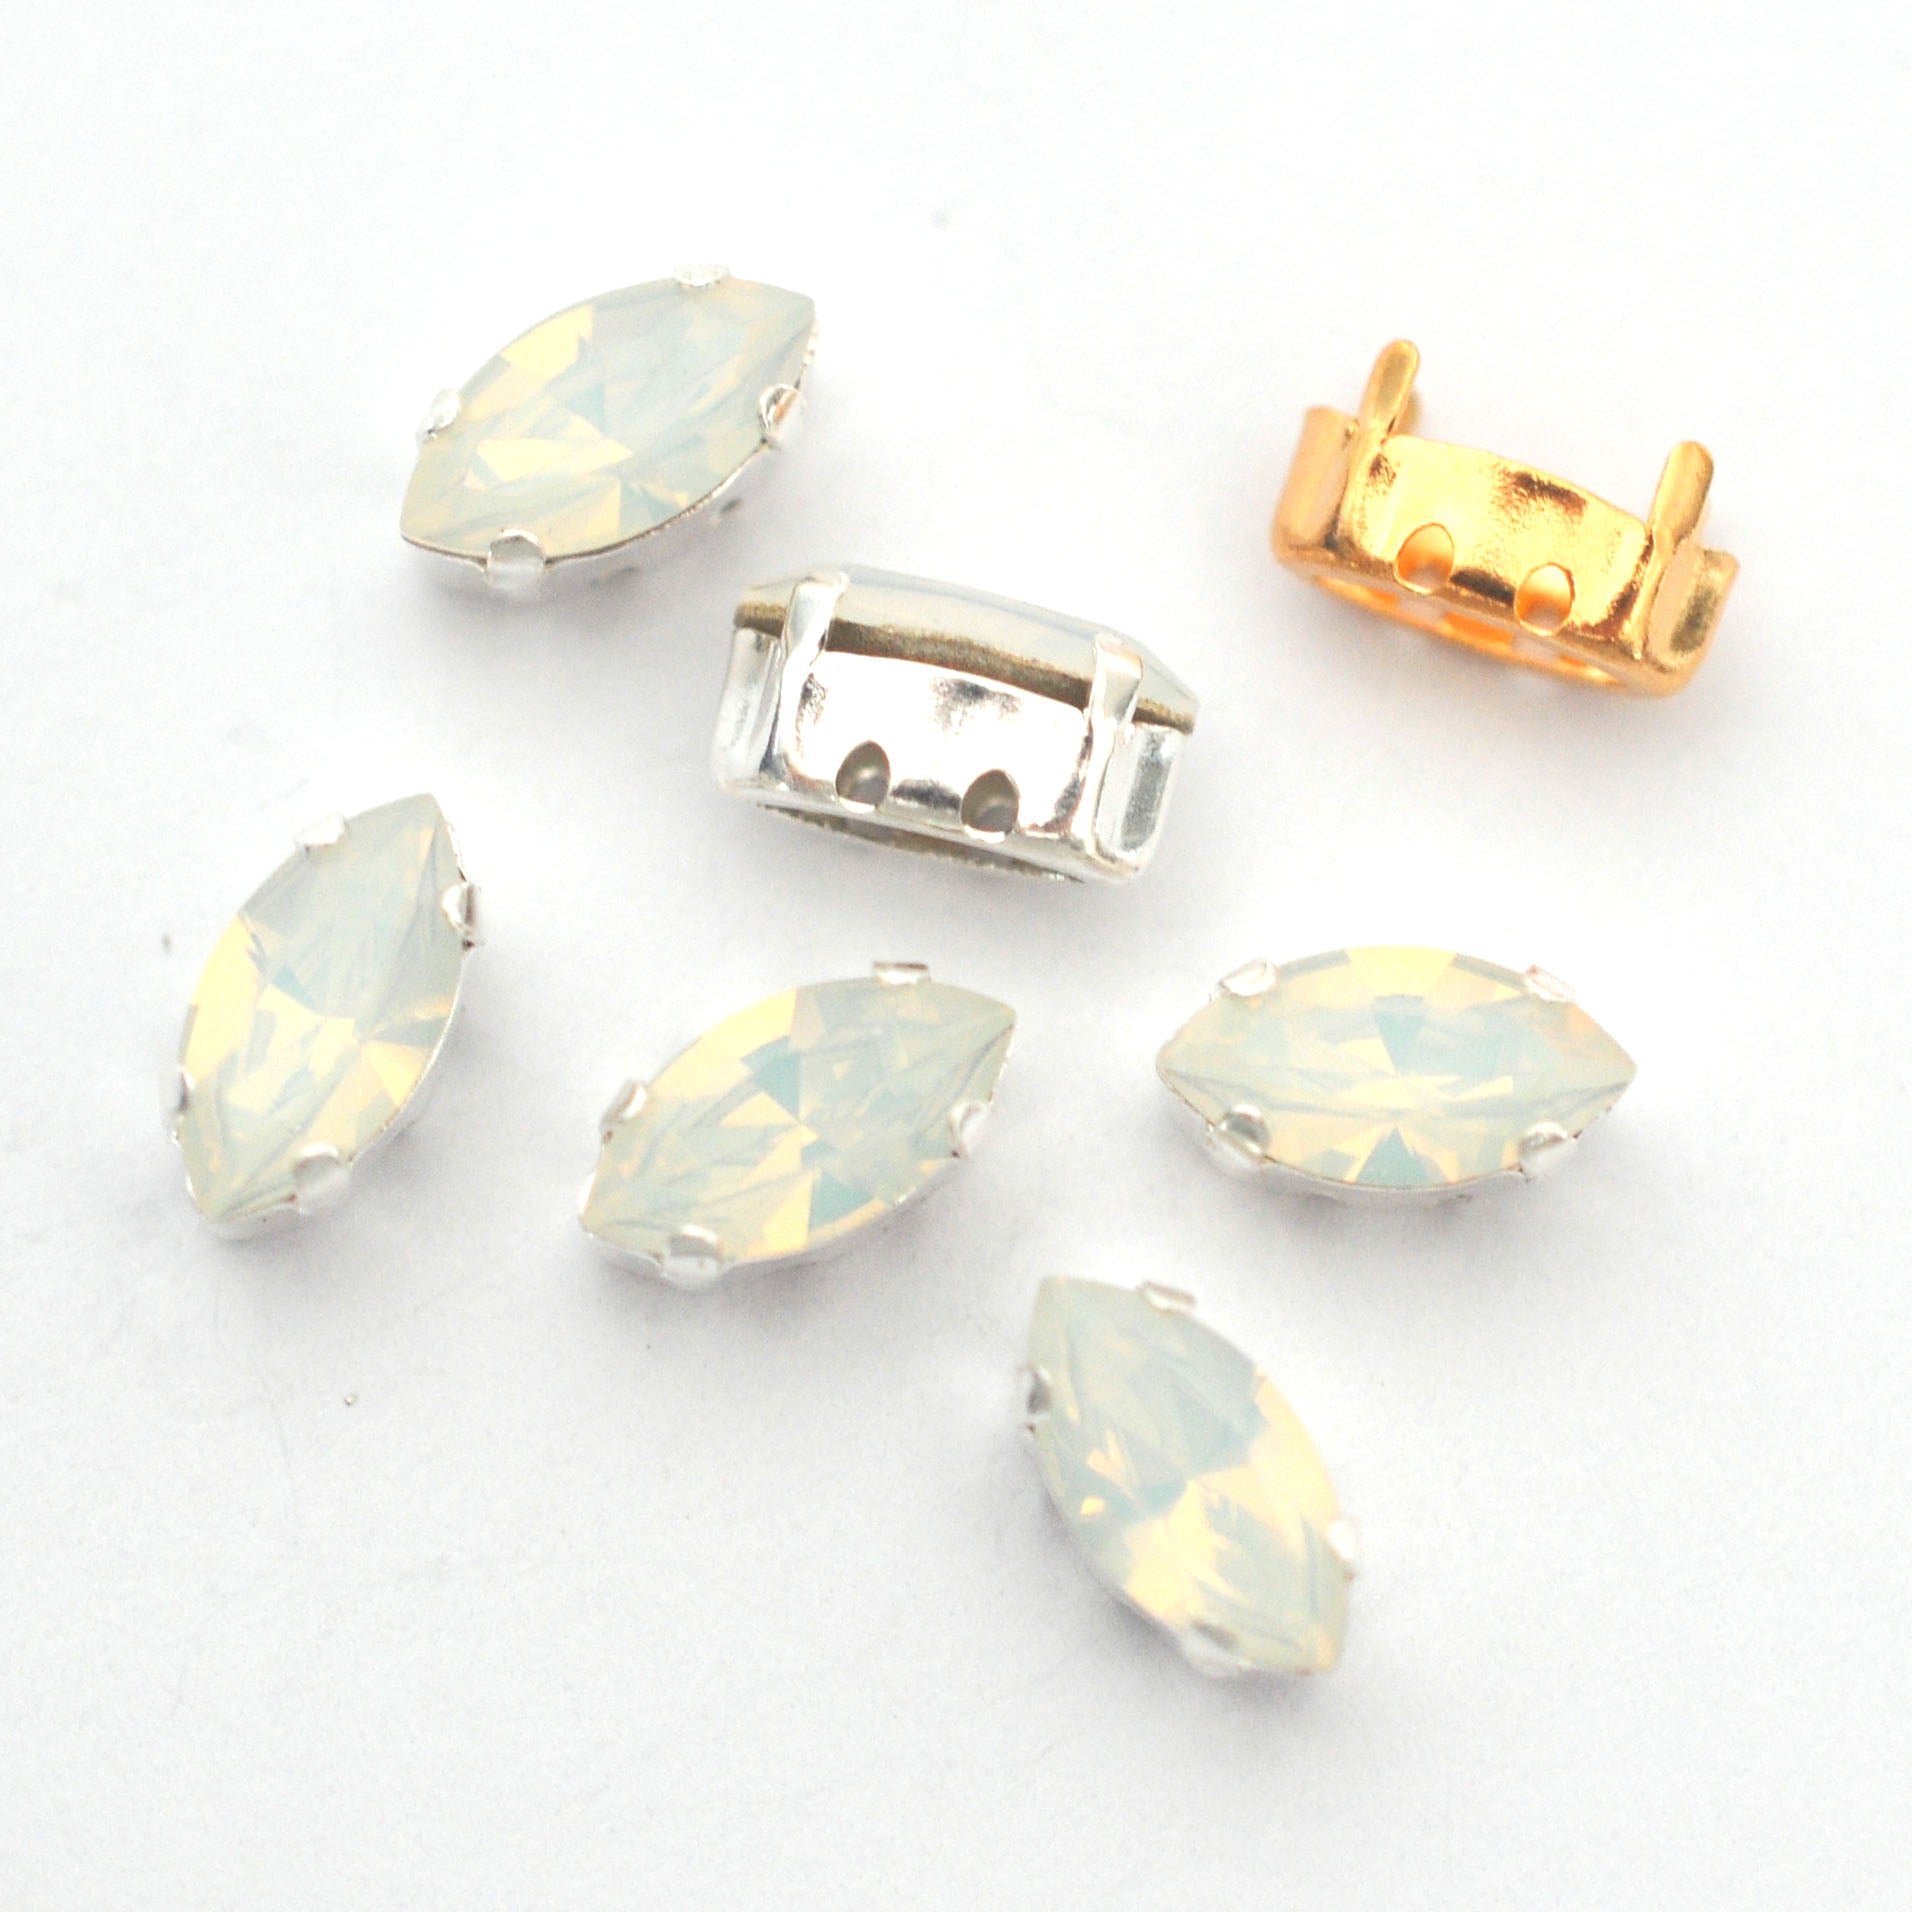 White Opal 10x5mm Navette Sew On Crystals - 6 Pieces